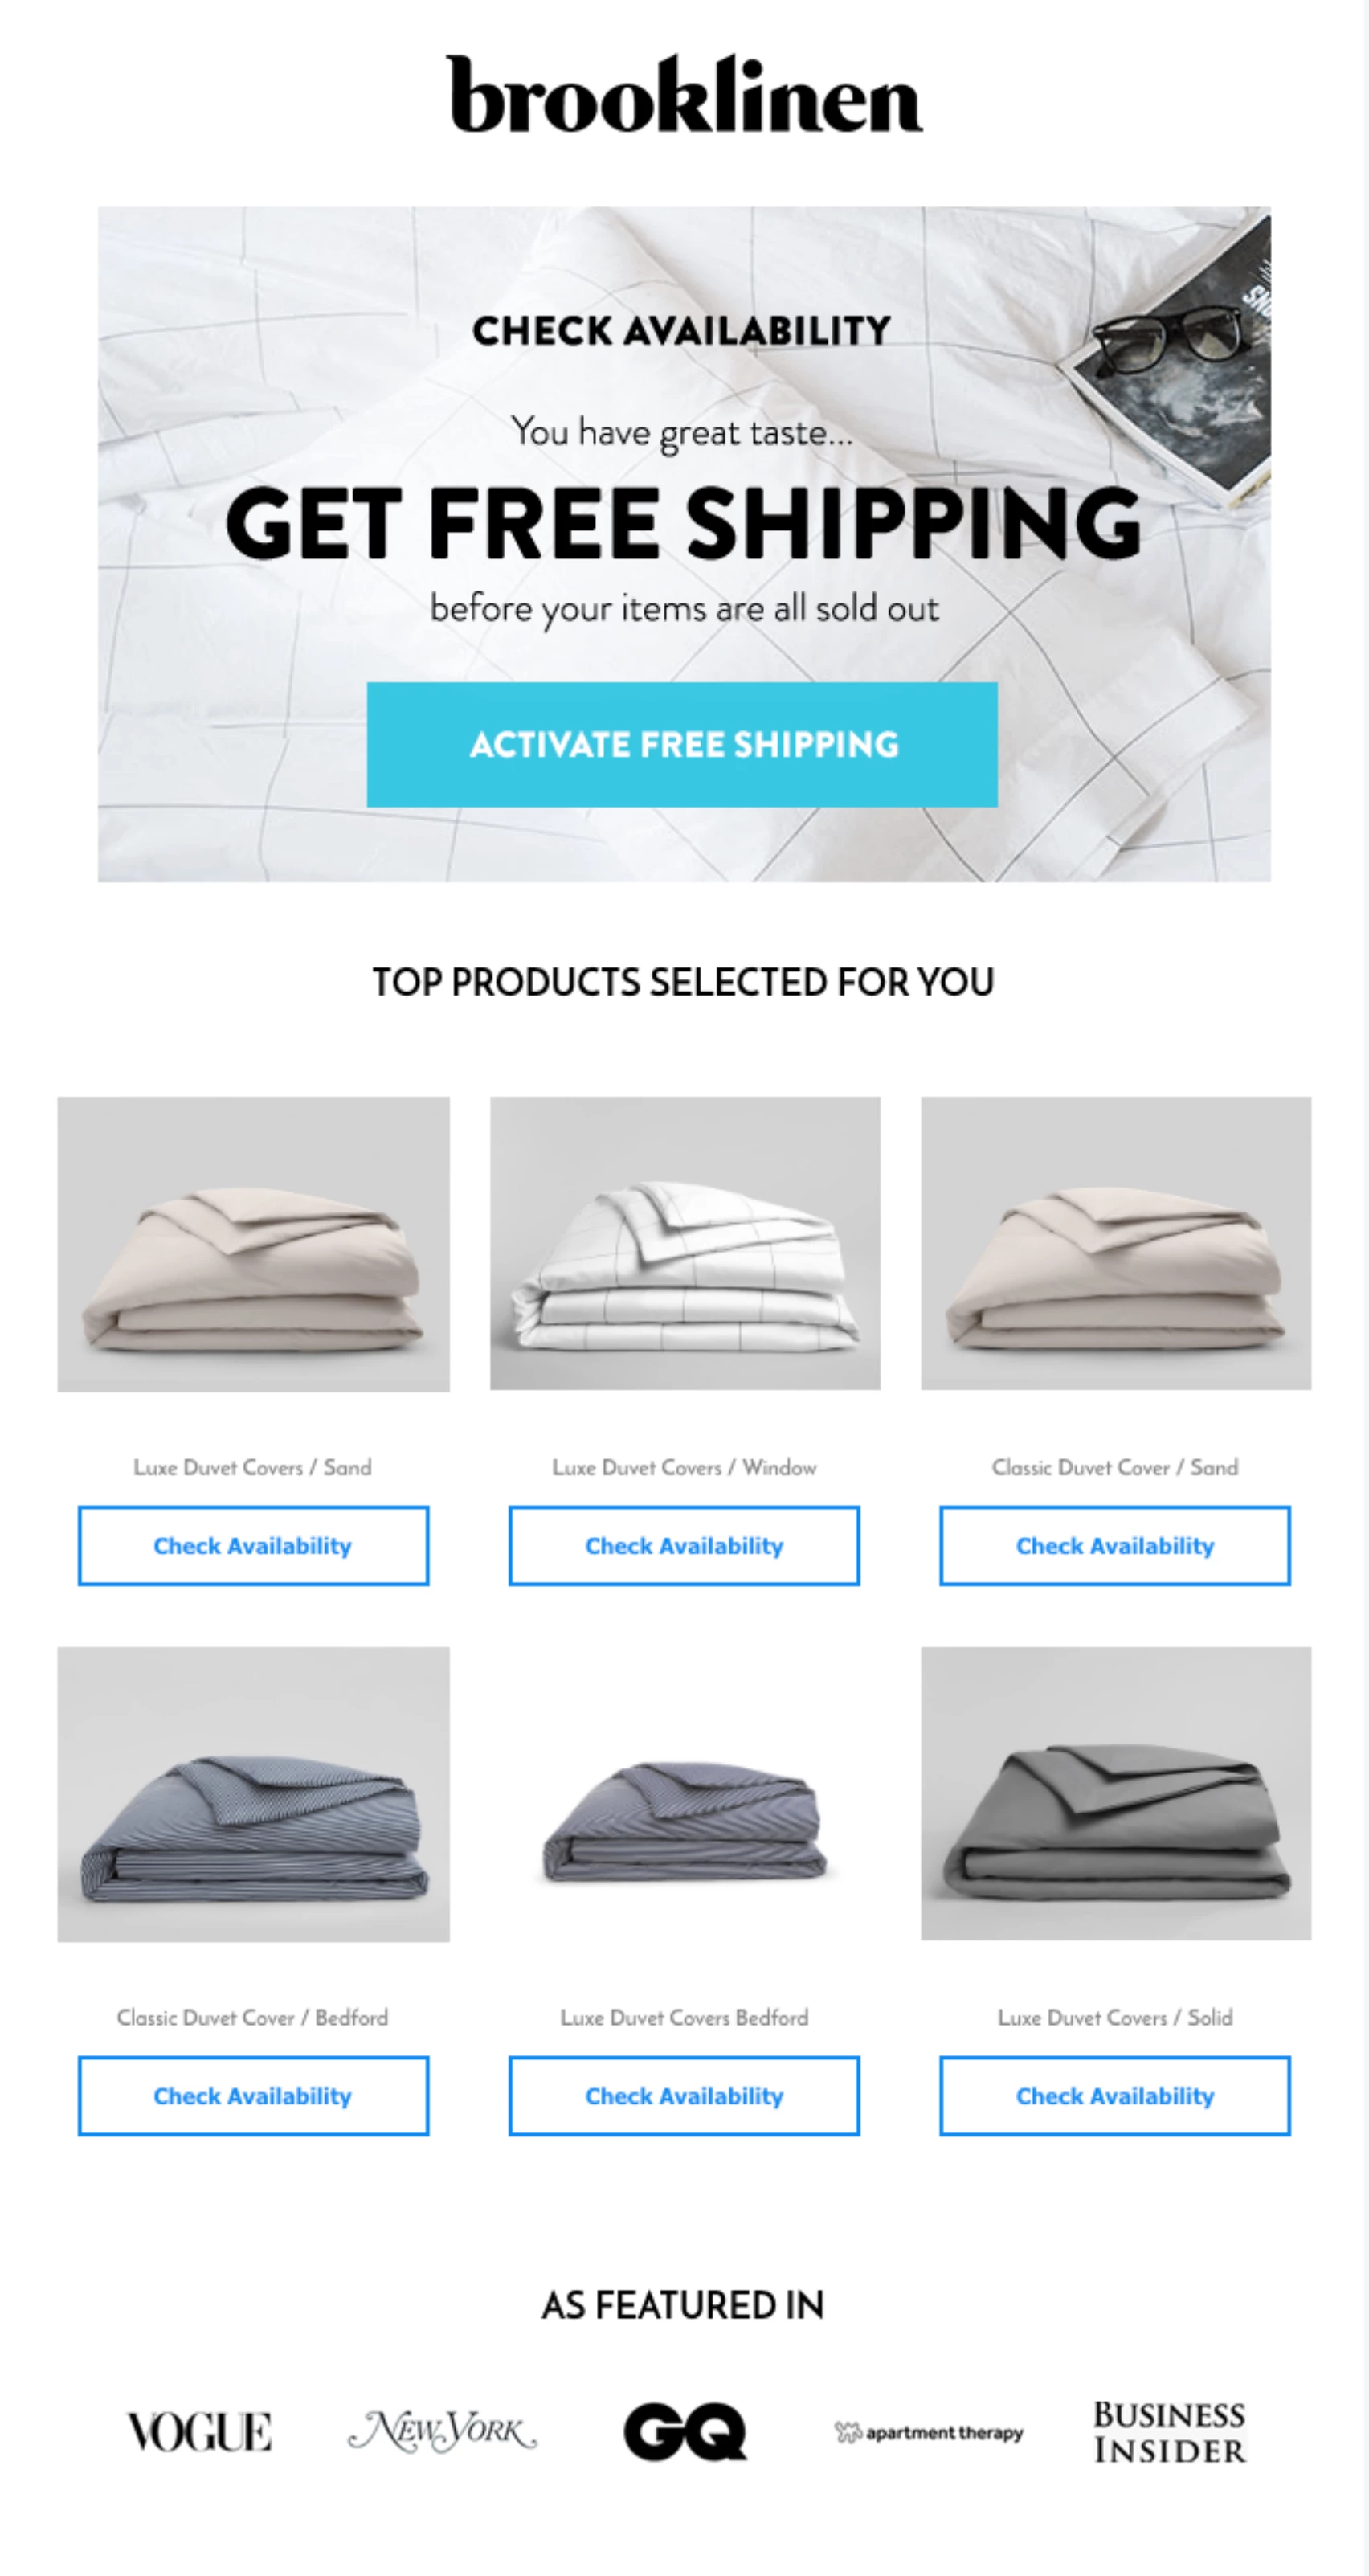 Abandoned cart email example from Brooklinen